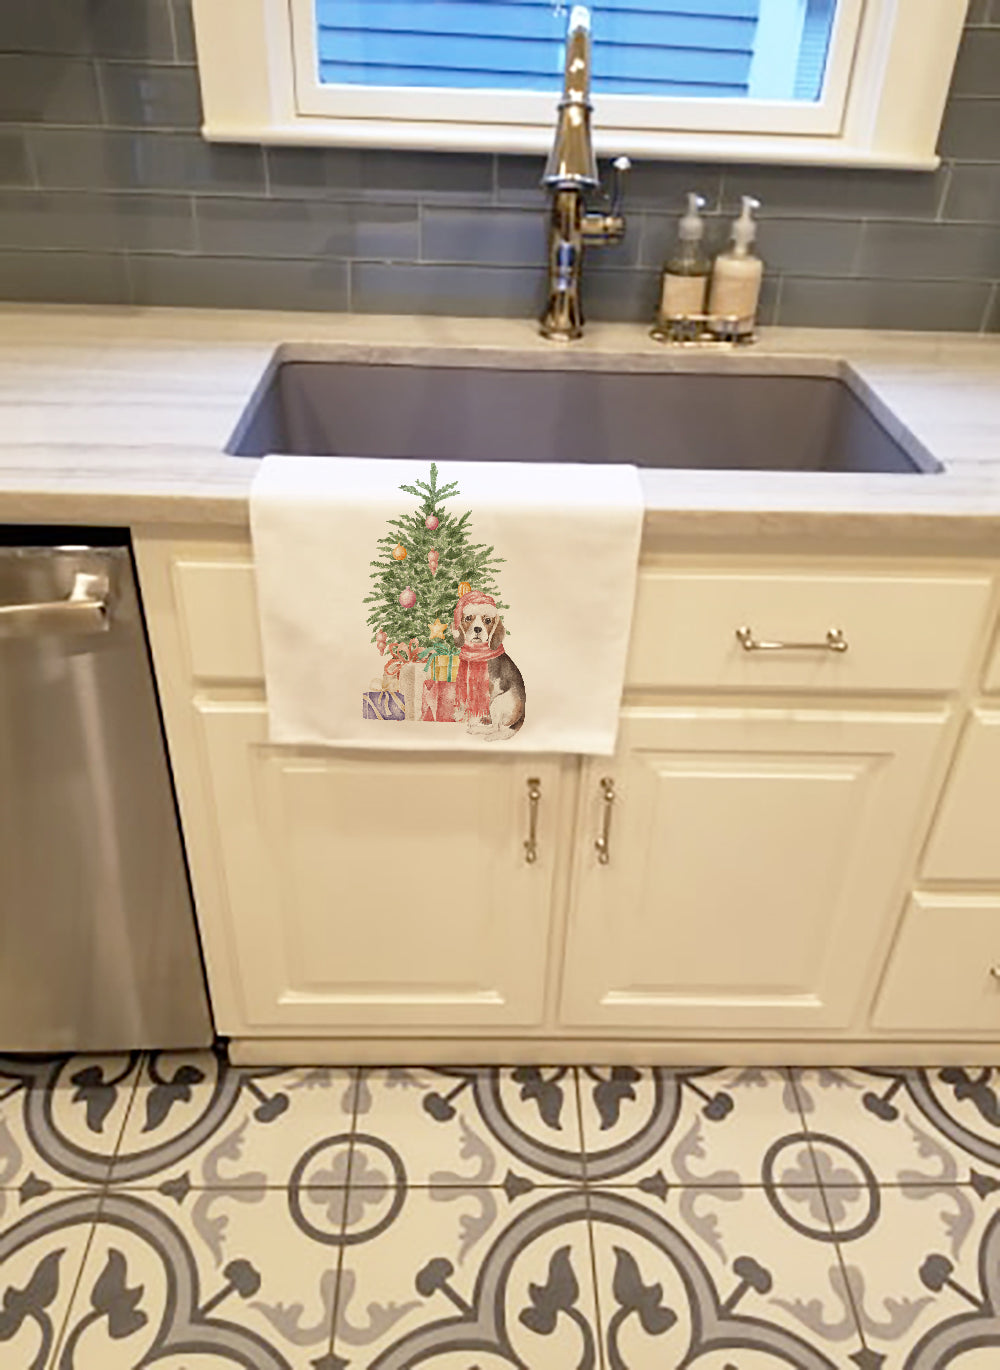 Buy this Beagle Puppy Christmas Presents and Tree White Kitchen Towel Set of 2